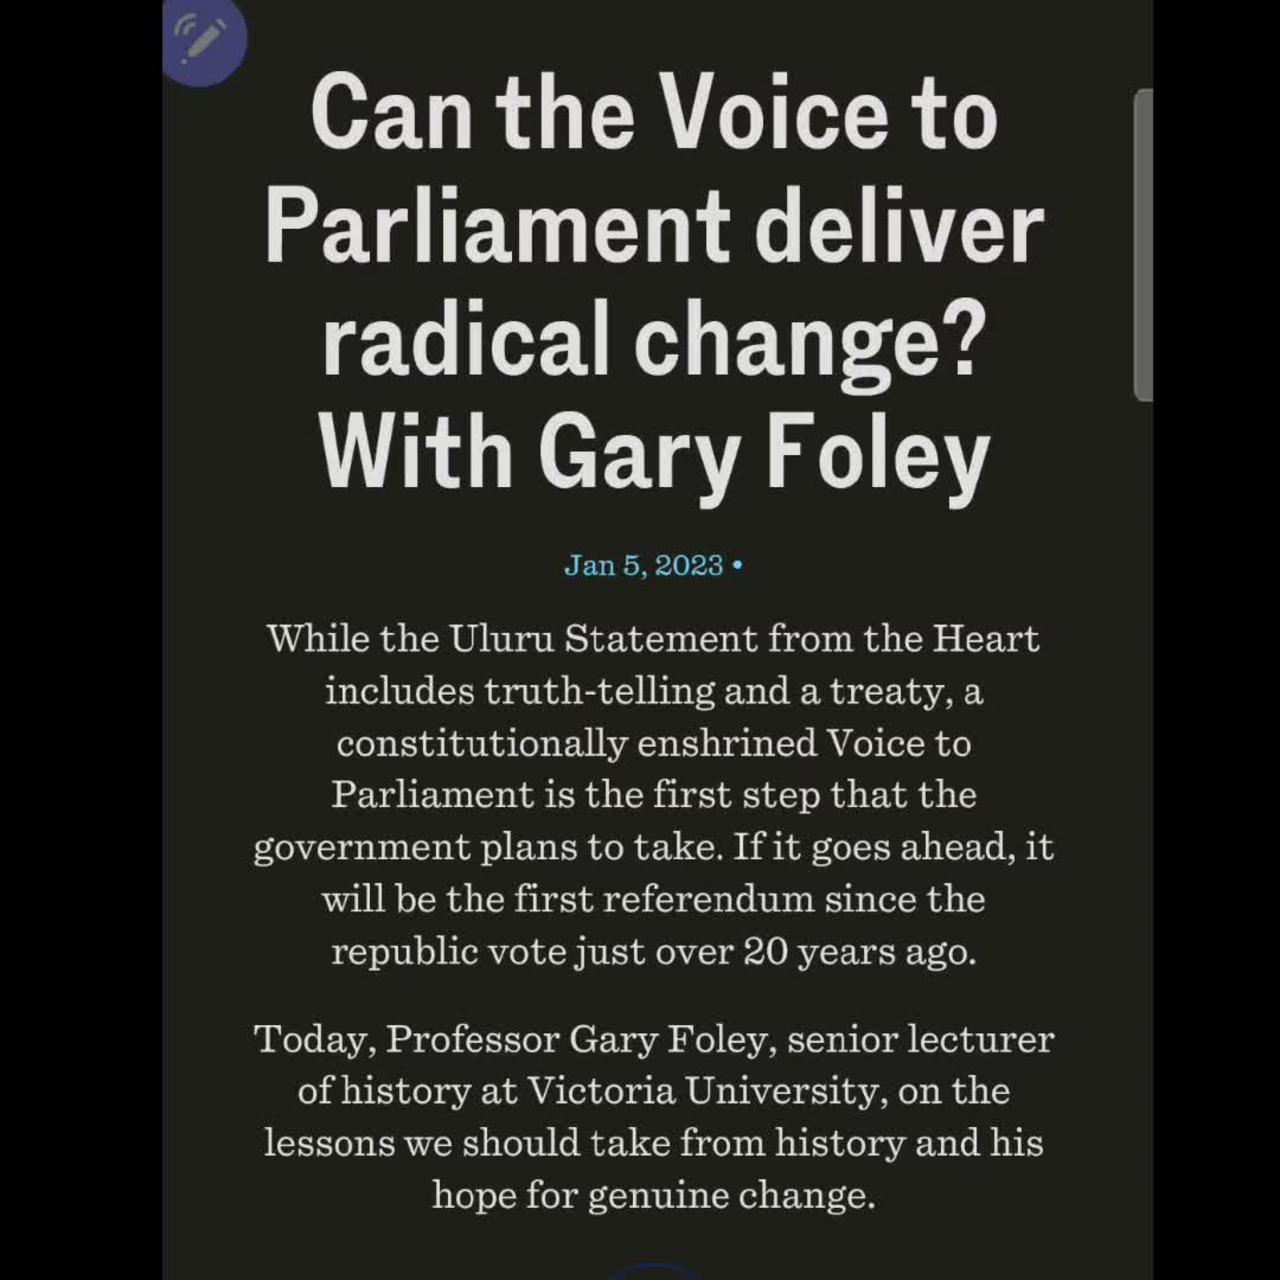 Gary Foley ABC Interview